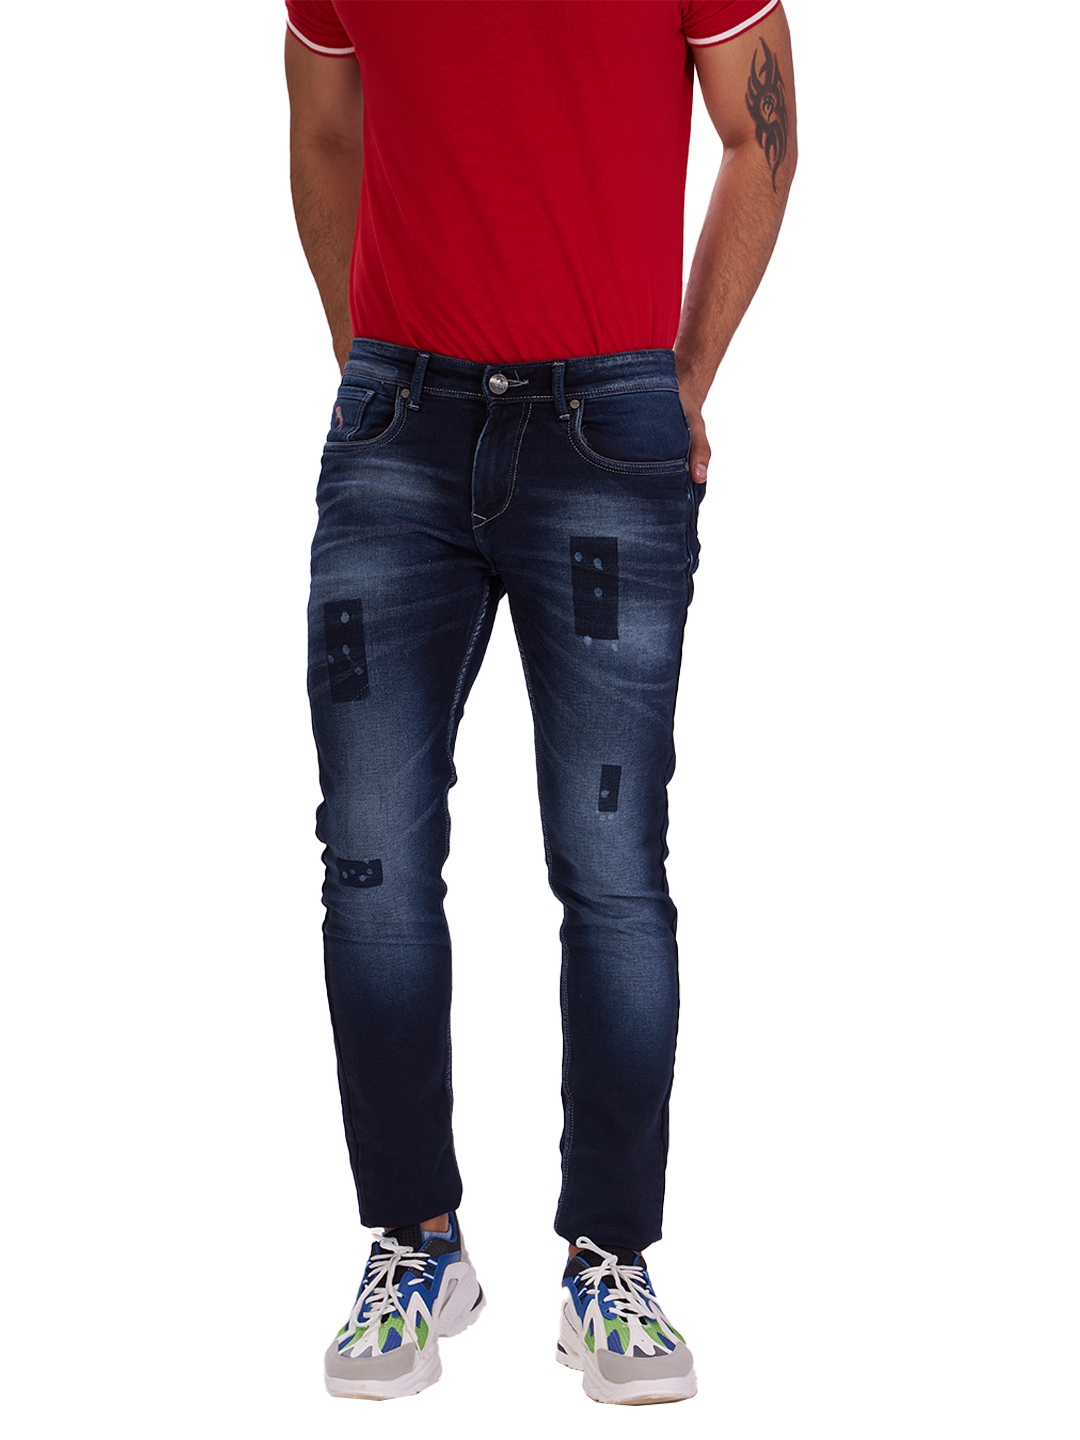 D'cot by Donear | D'cot by Donear Mens Grey Cotton Jeans